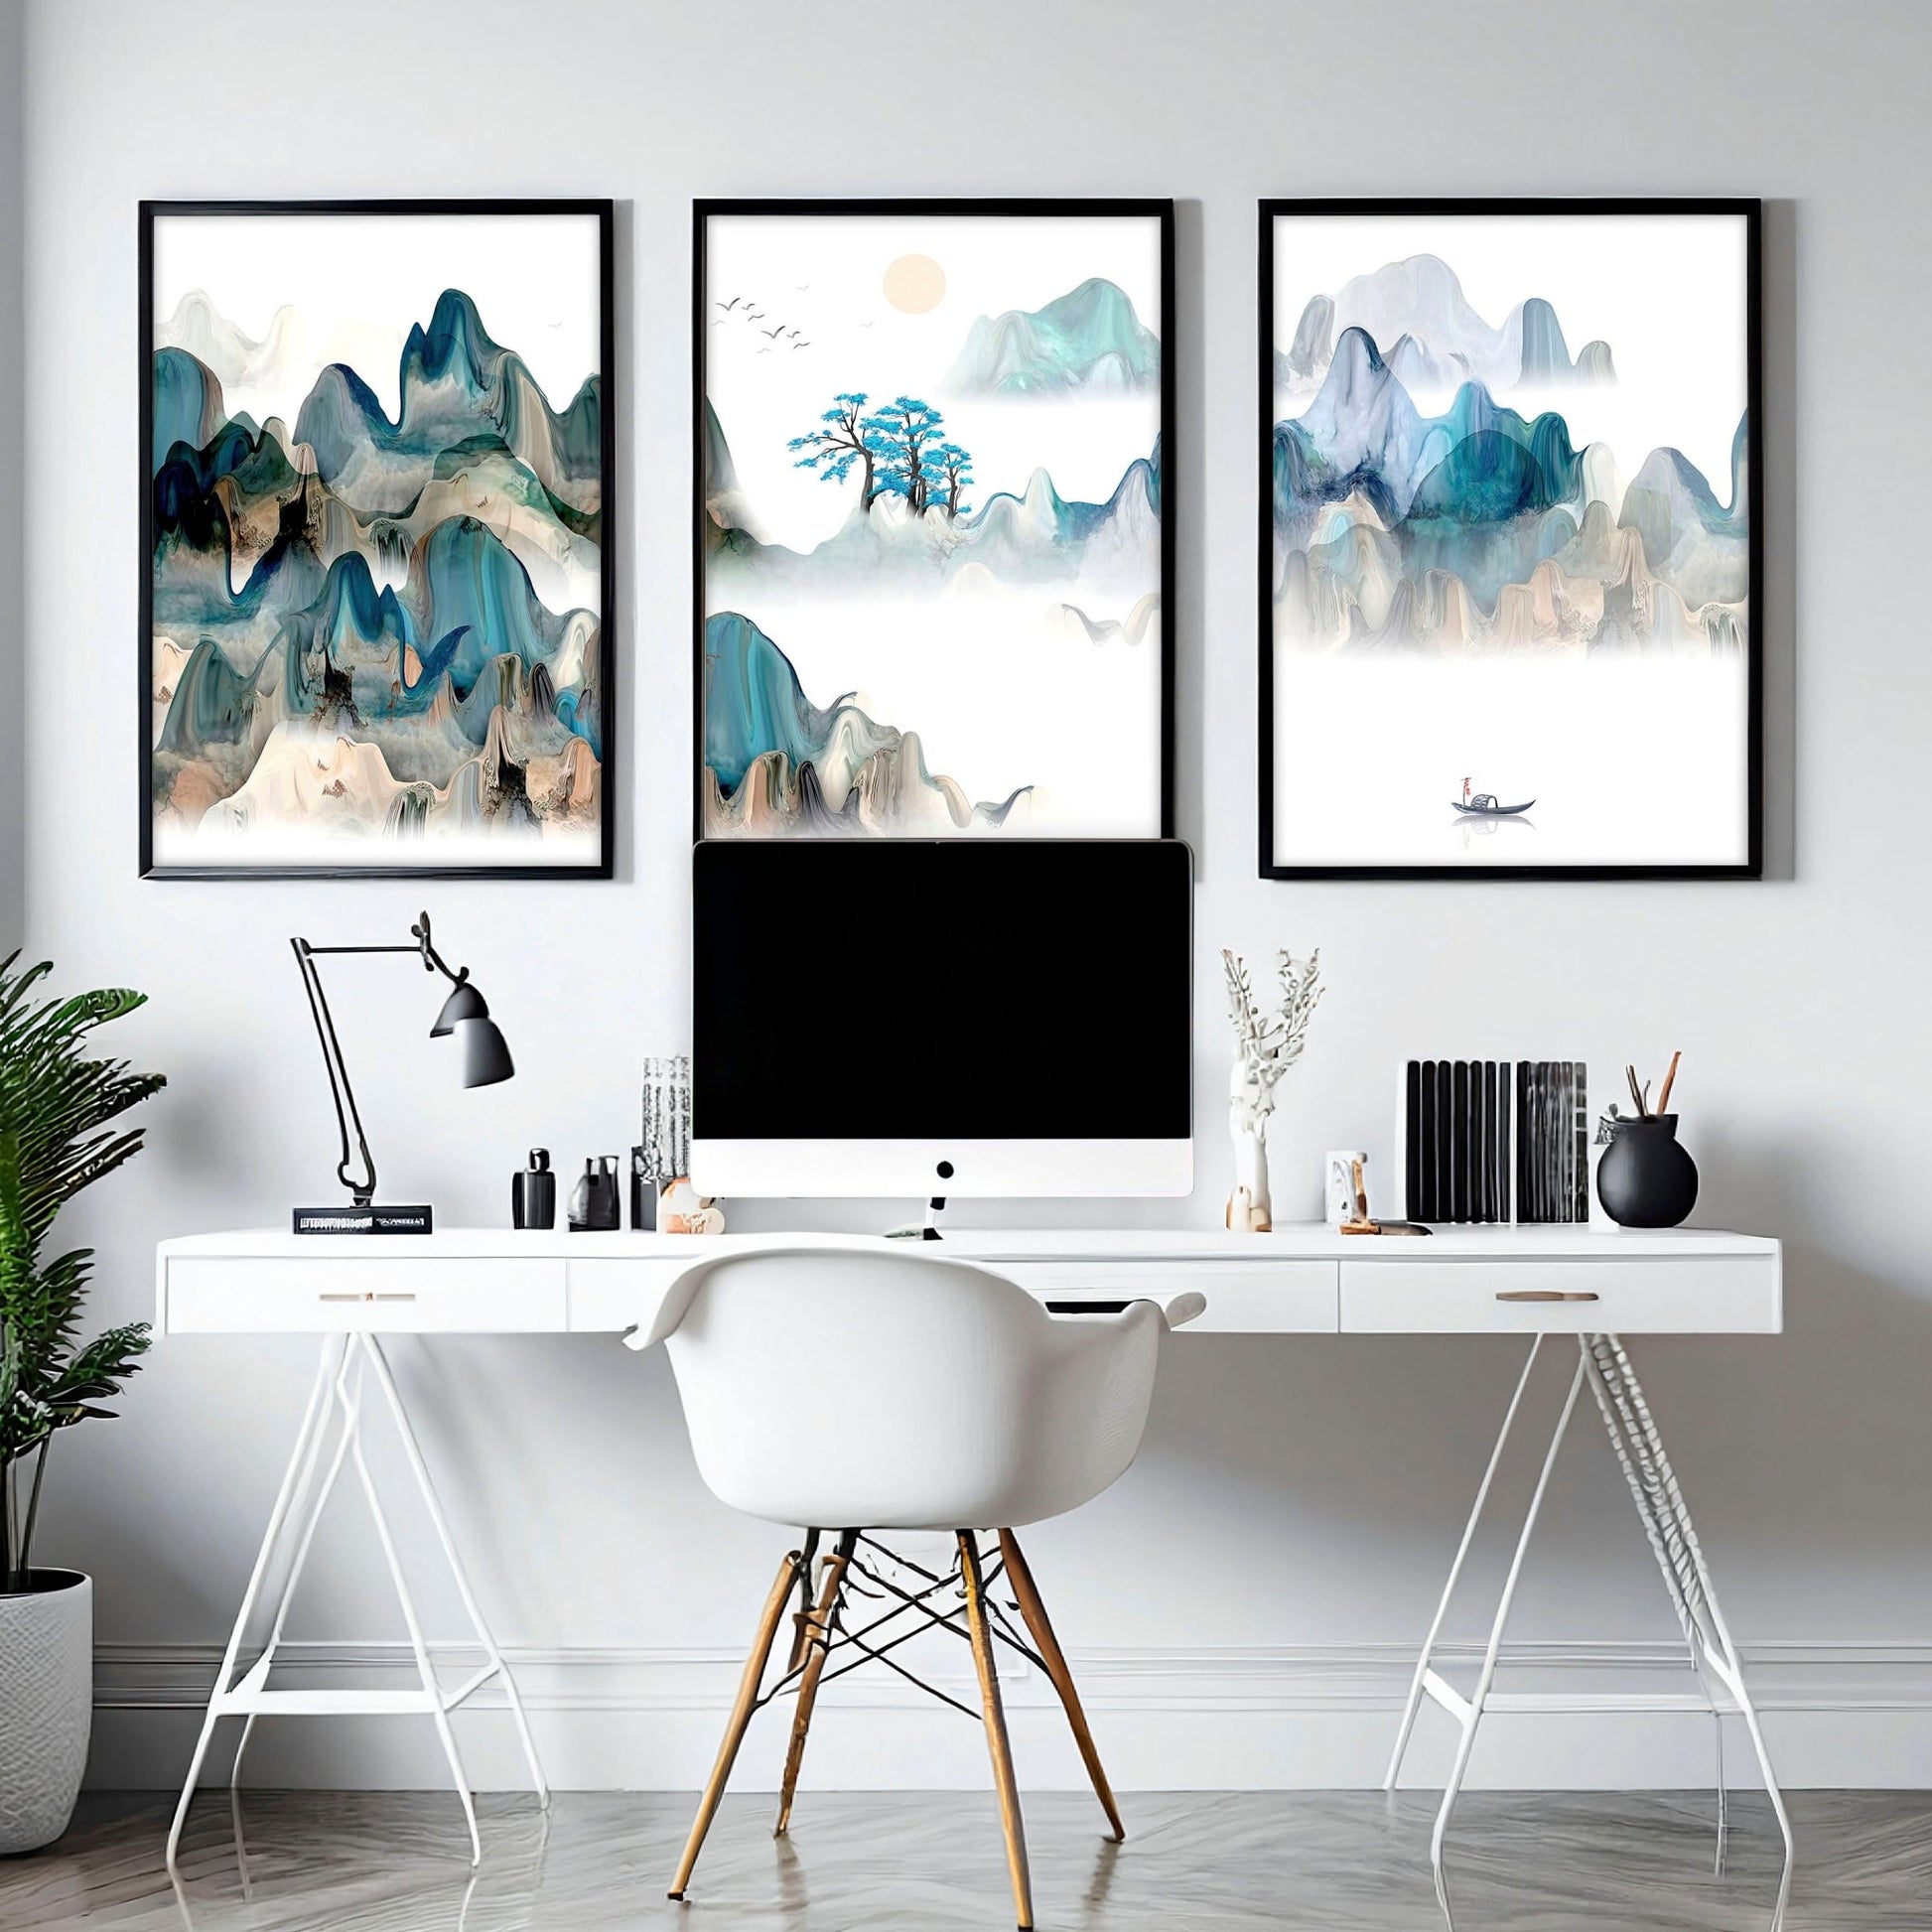 Paintings of a sunset | set of 3 wall art prints for home office - About Wall Art